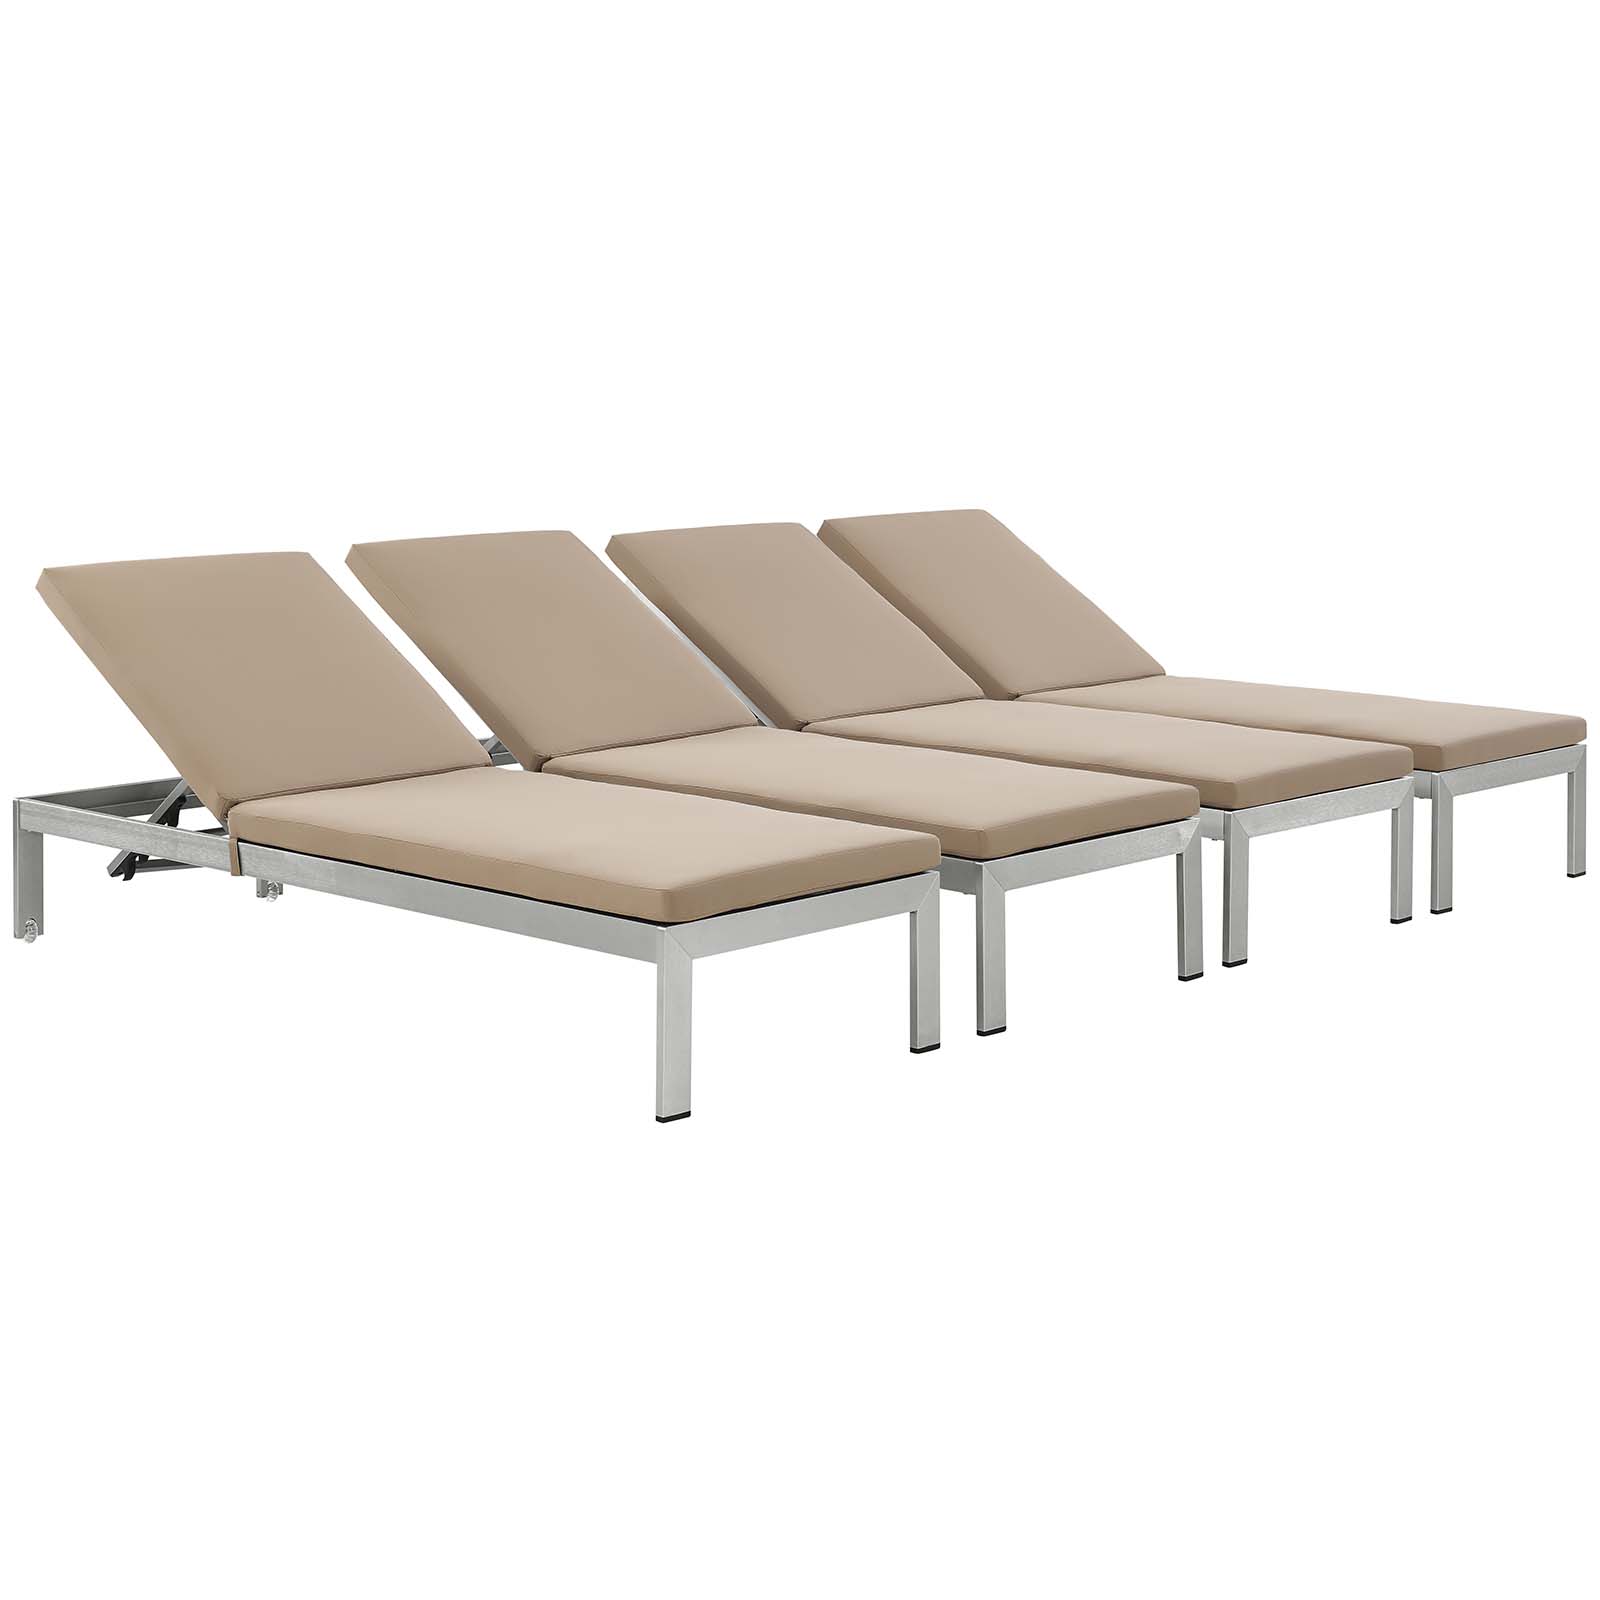 Modern Contemporary Urban Design Outdoor Patio Balcony Chaise Lounge Chair ( Set of 4), Brown, Aluminum - image 1 of 6